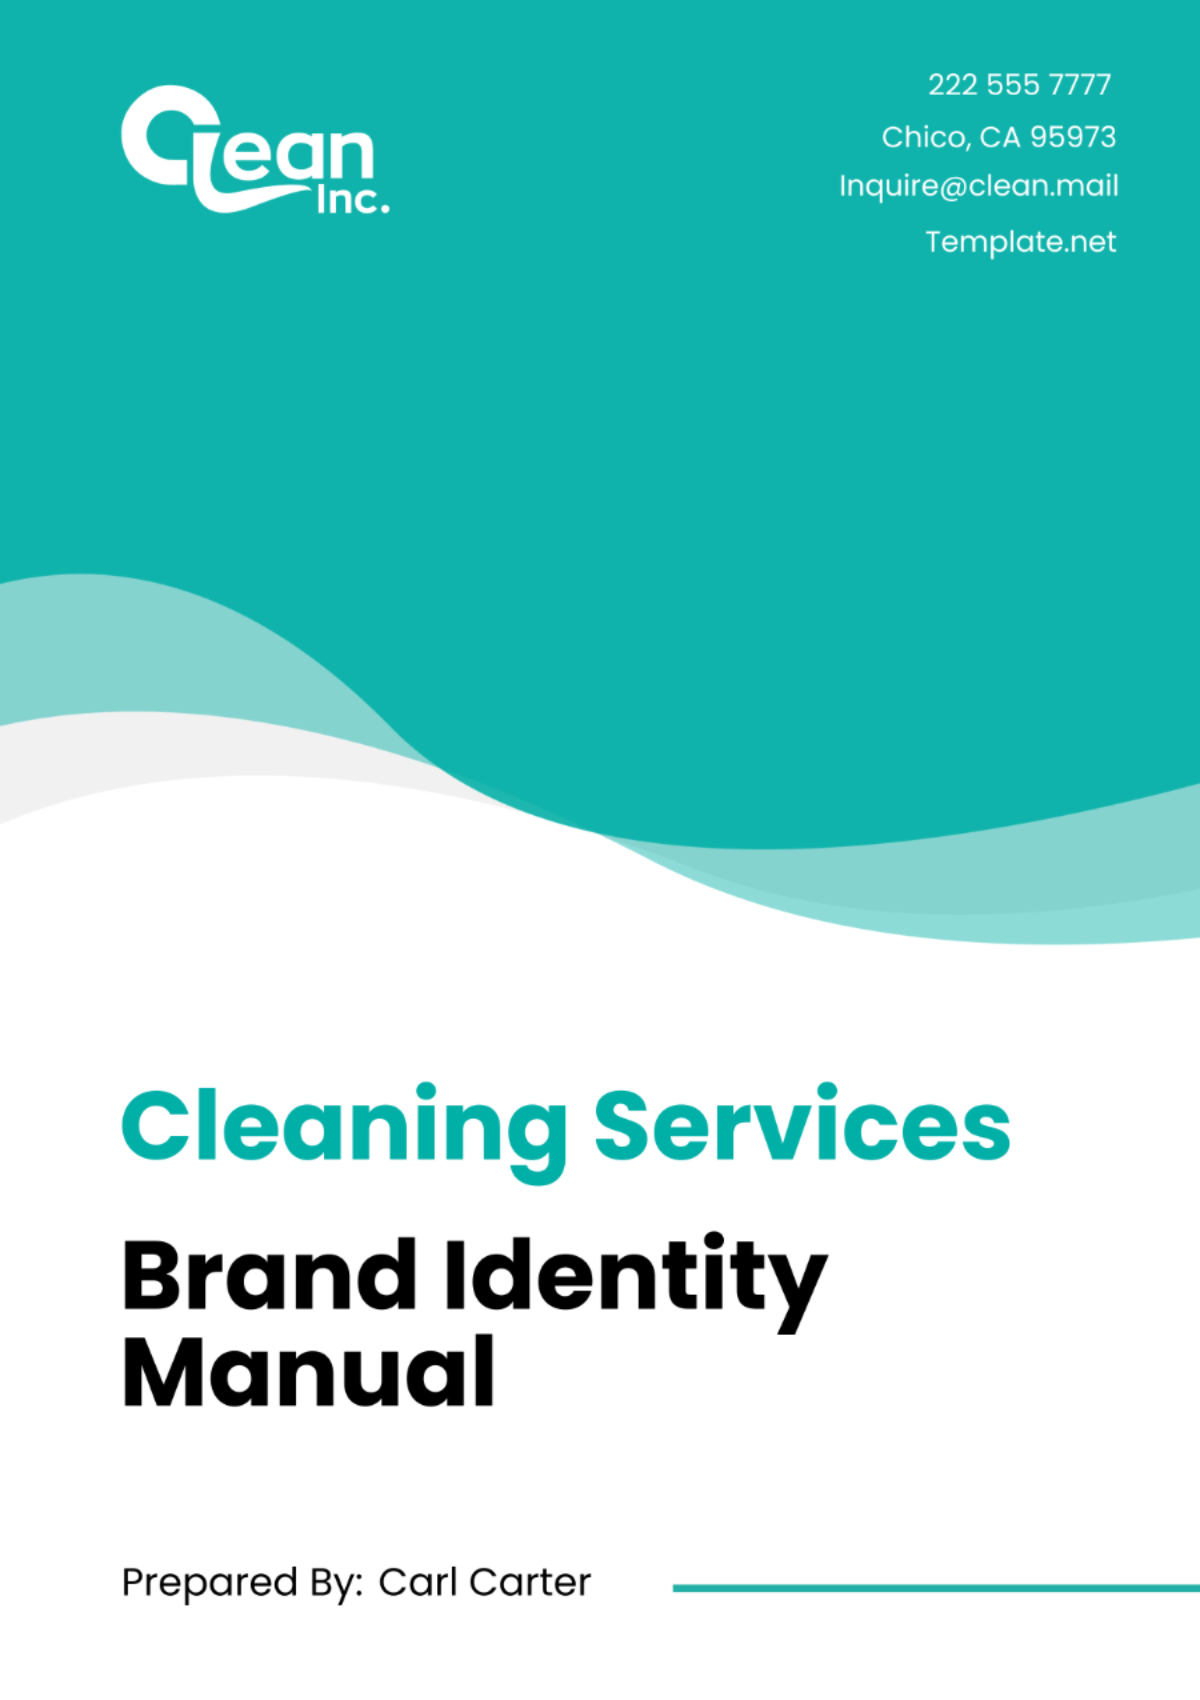 Cleaning Services Brand Identity Manual Template